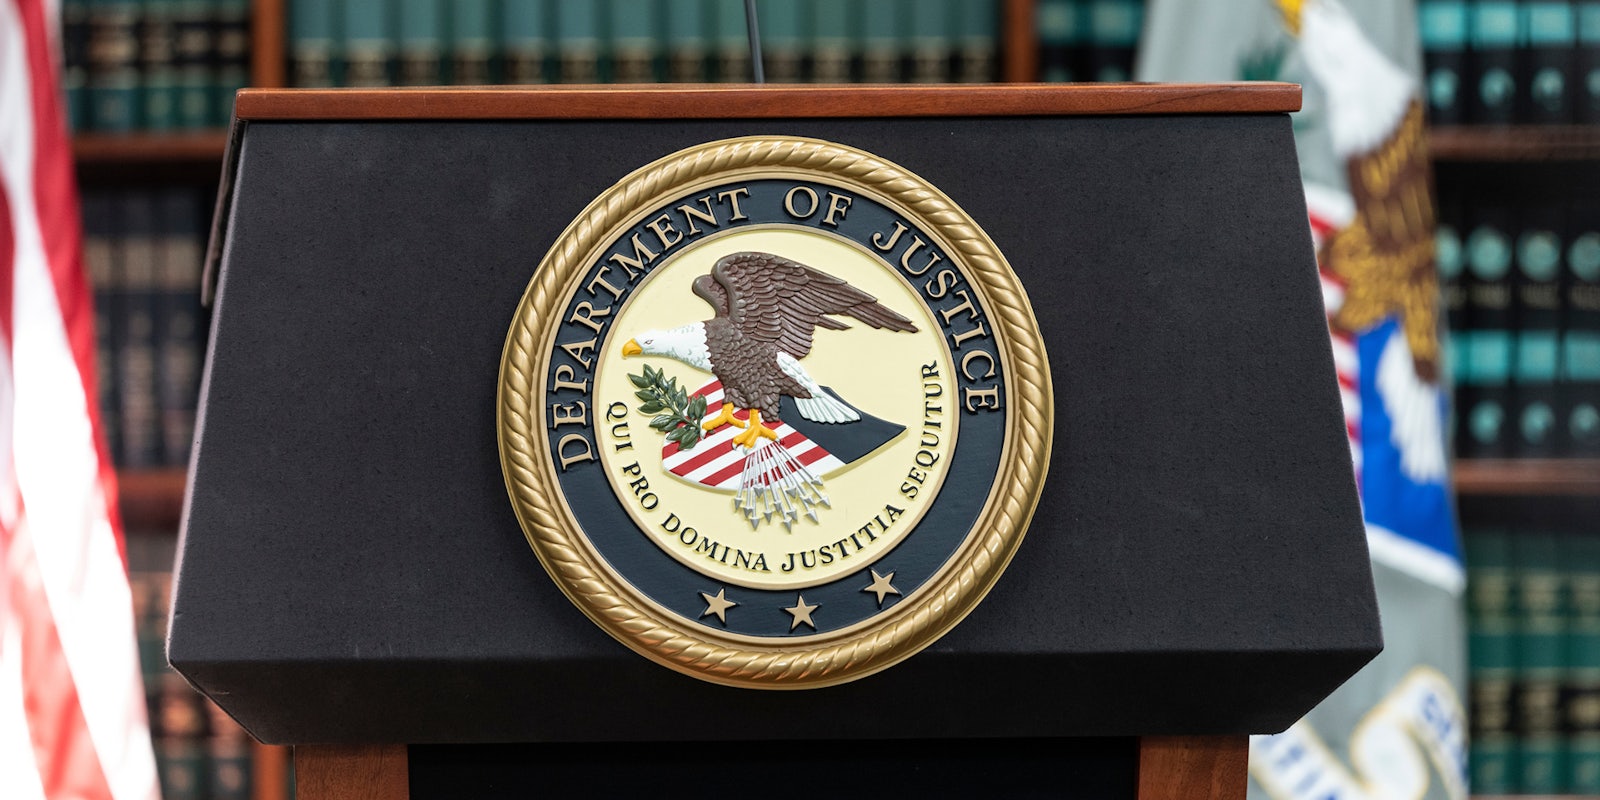 Department Of Justice seal on podium